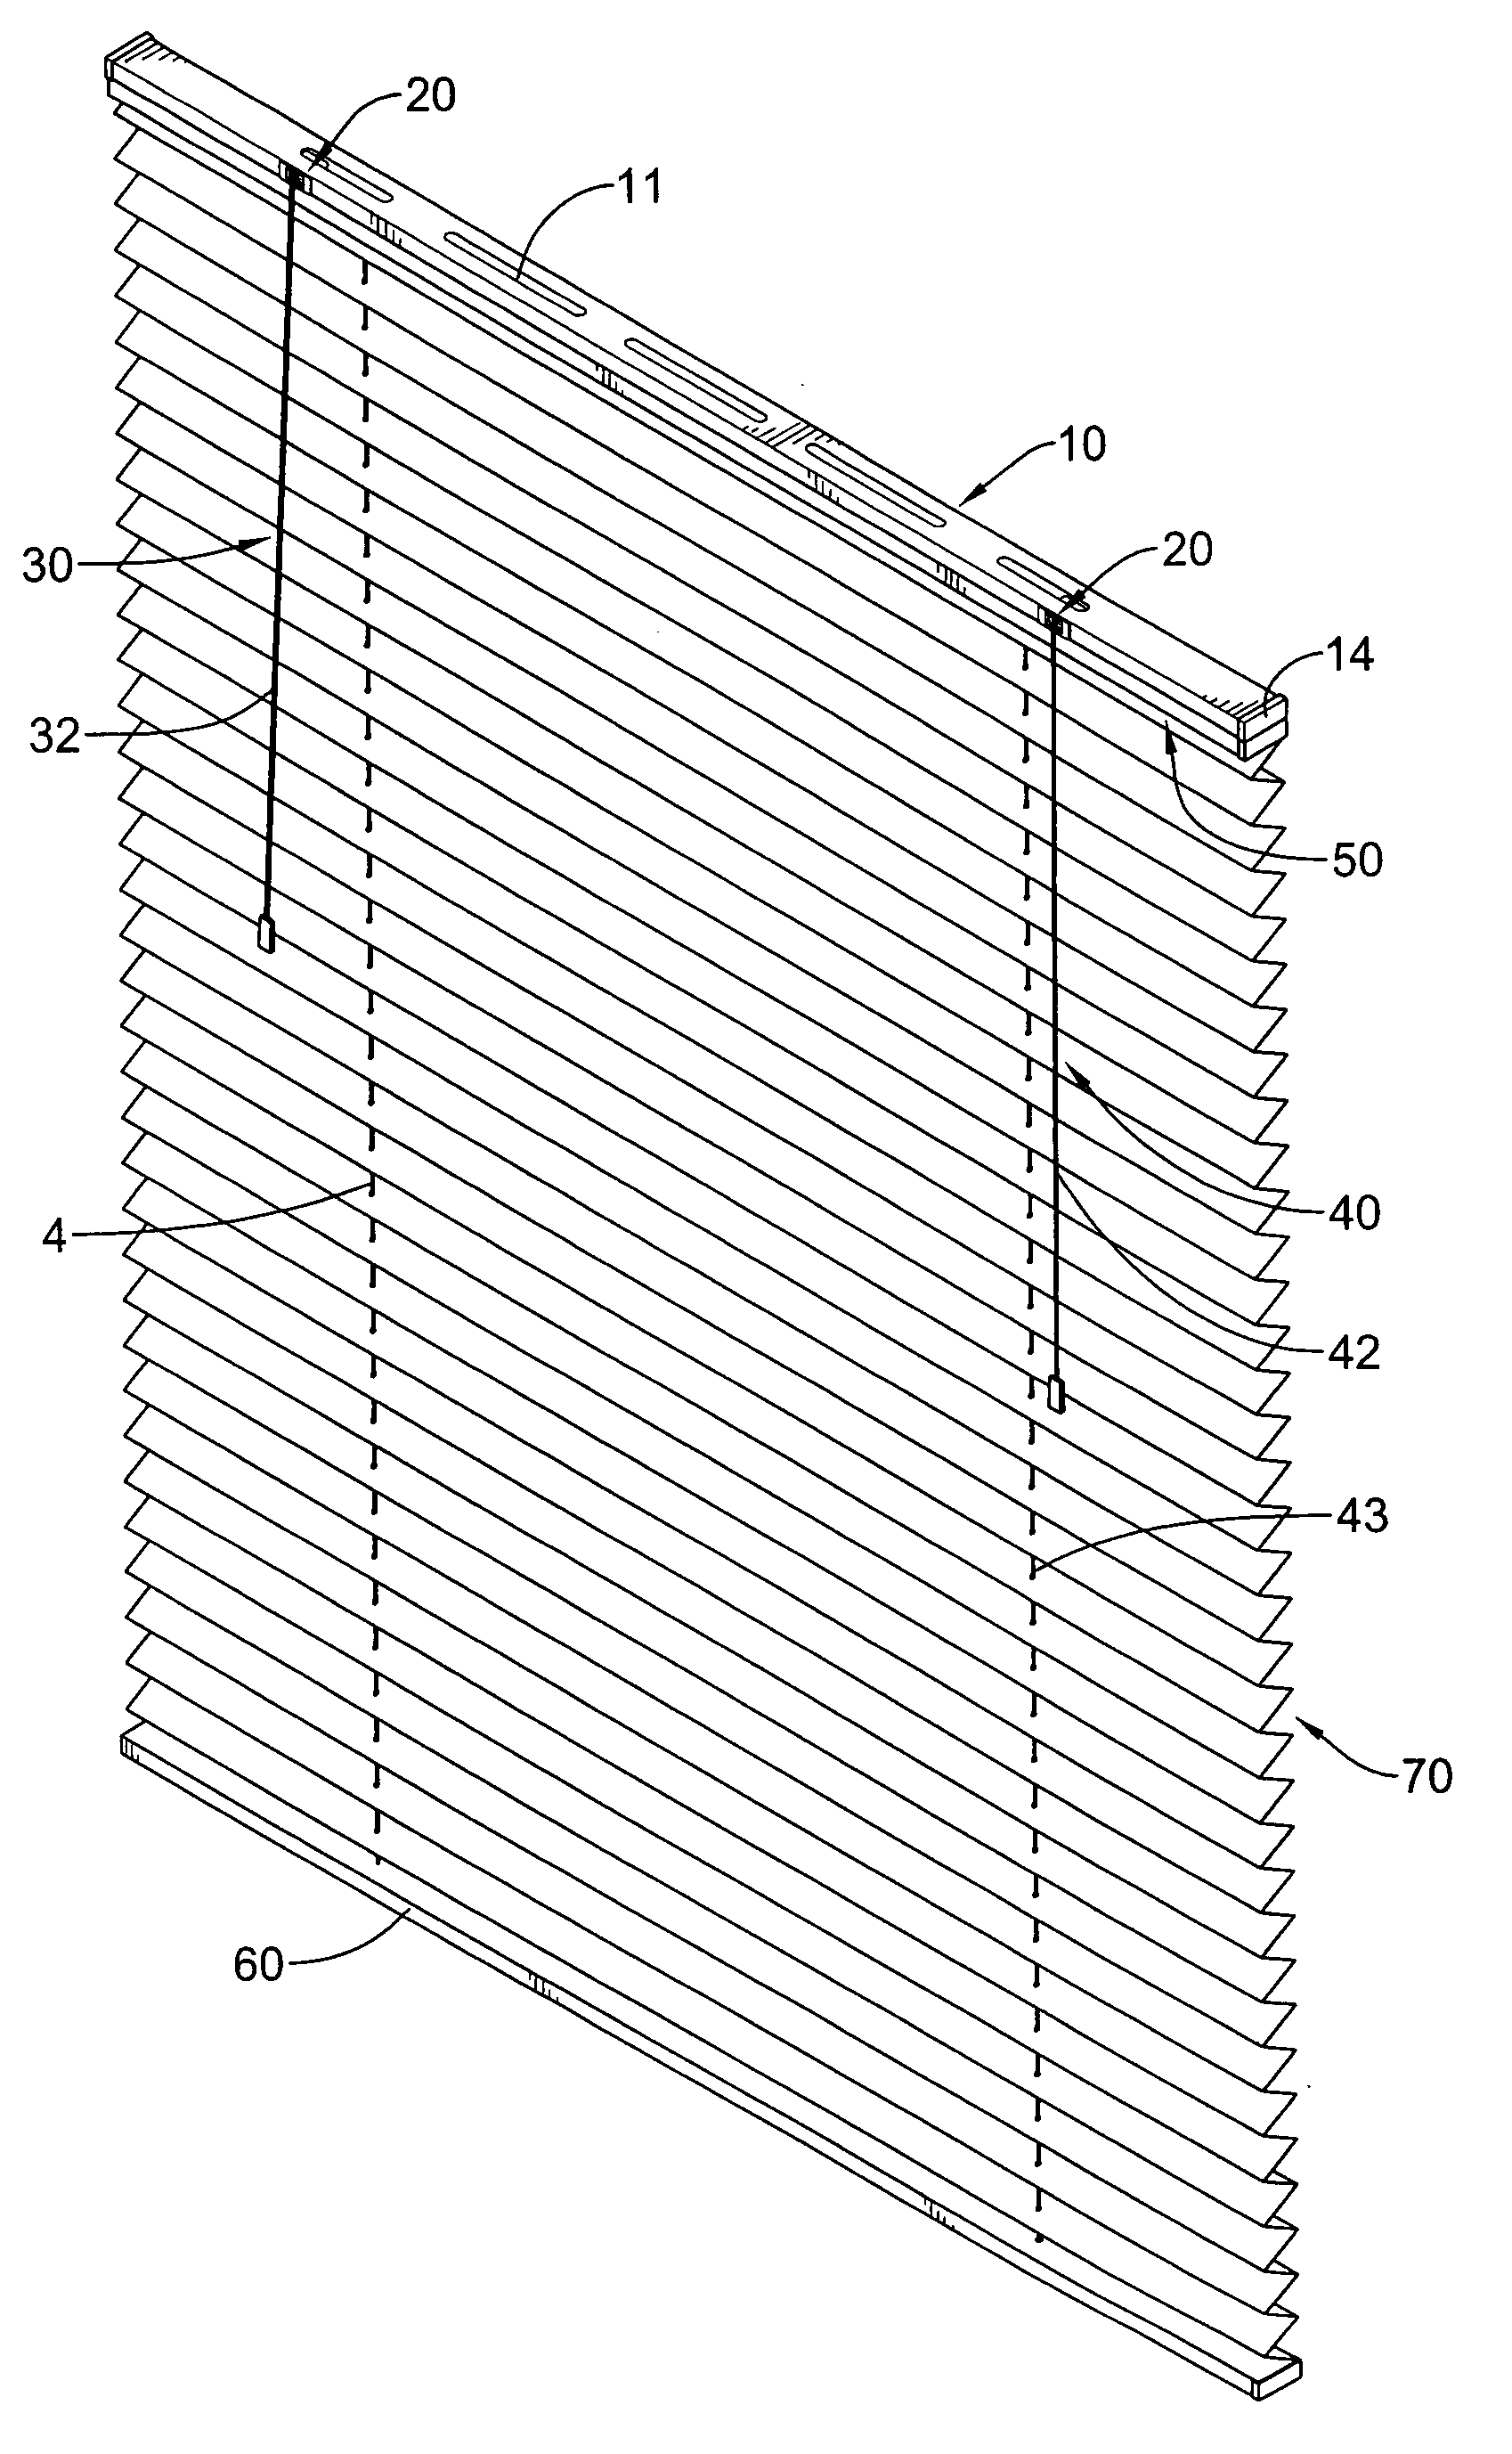 Window covering device